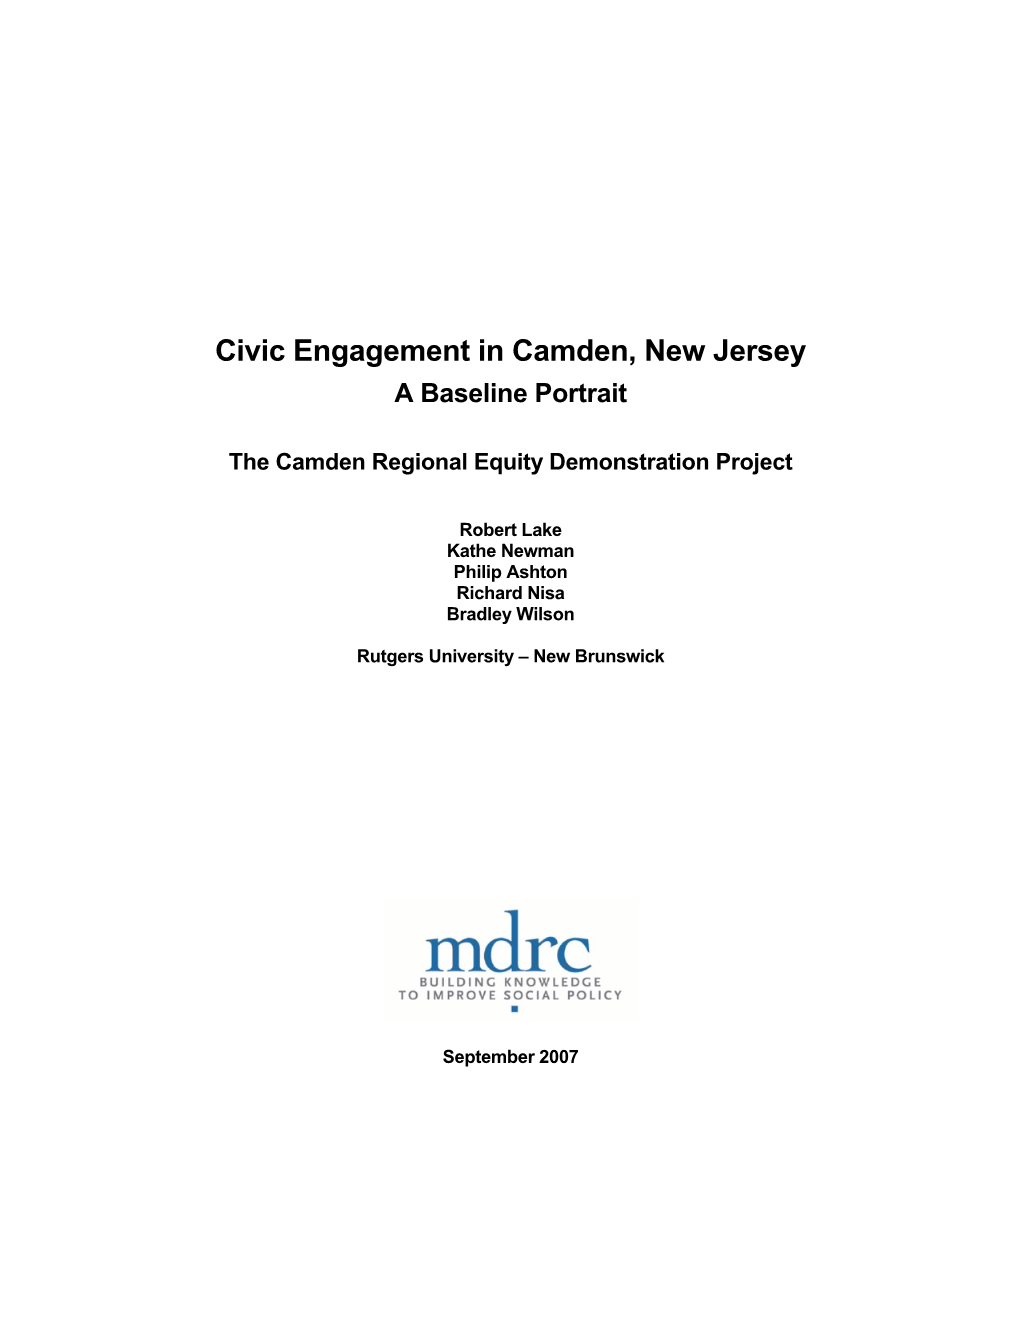 Civic Engagement in Camden, New Jersey a Baseline Portrait